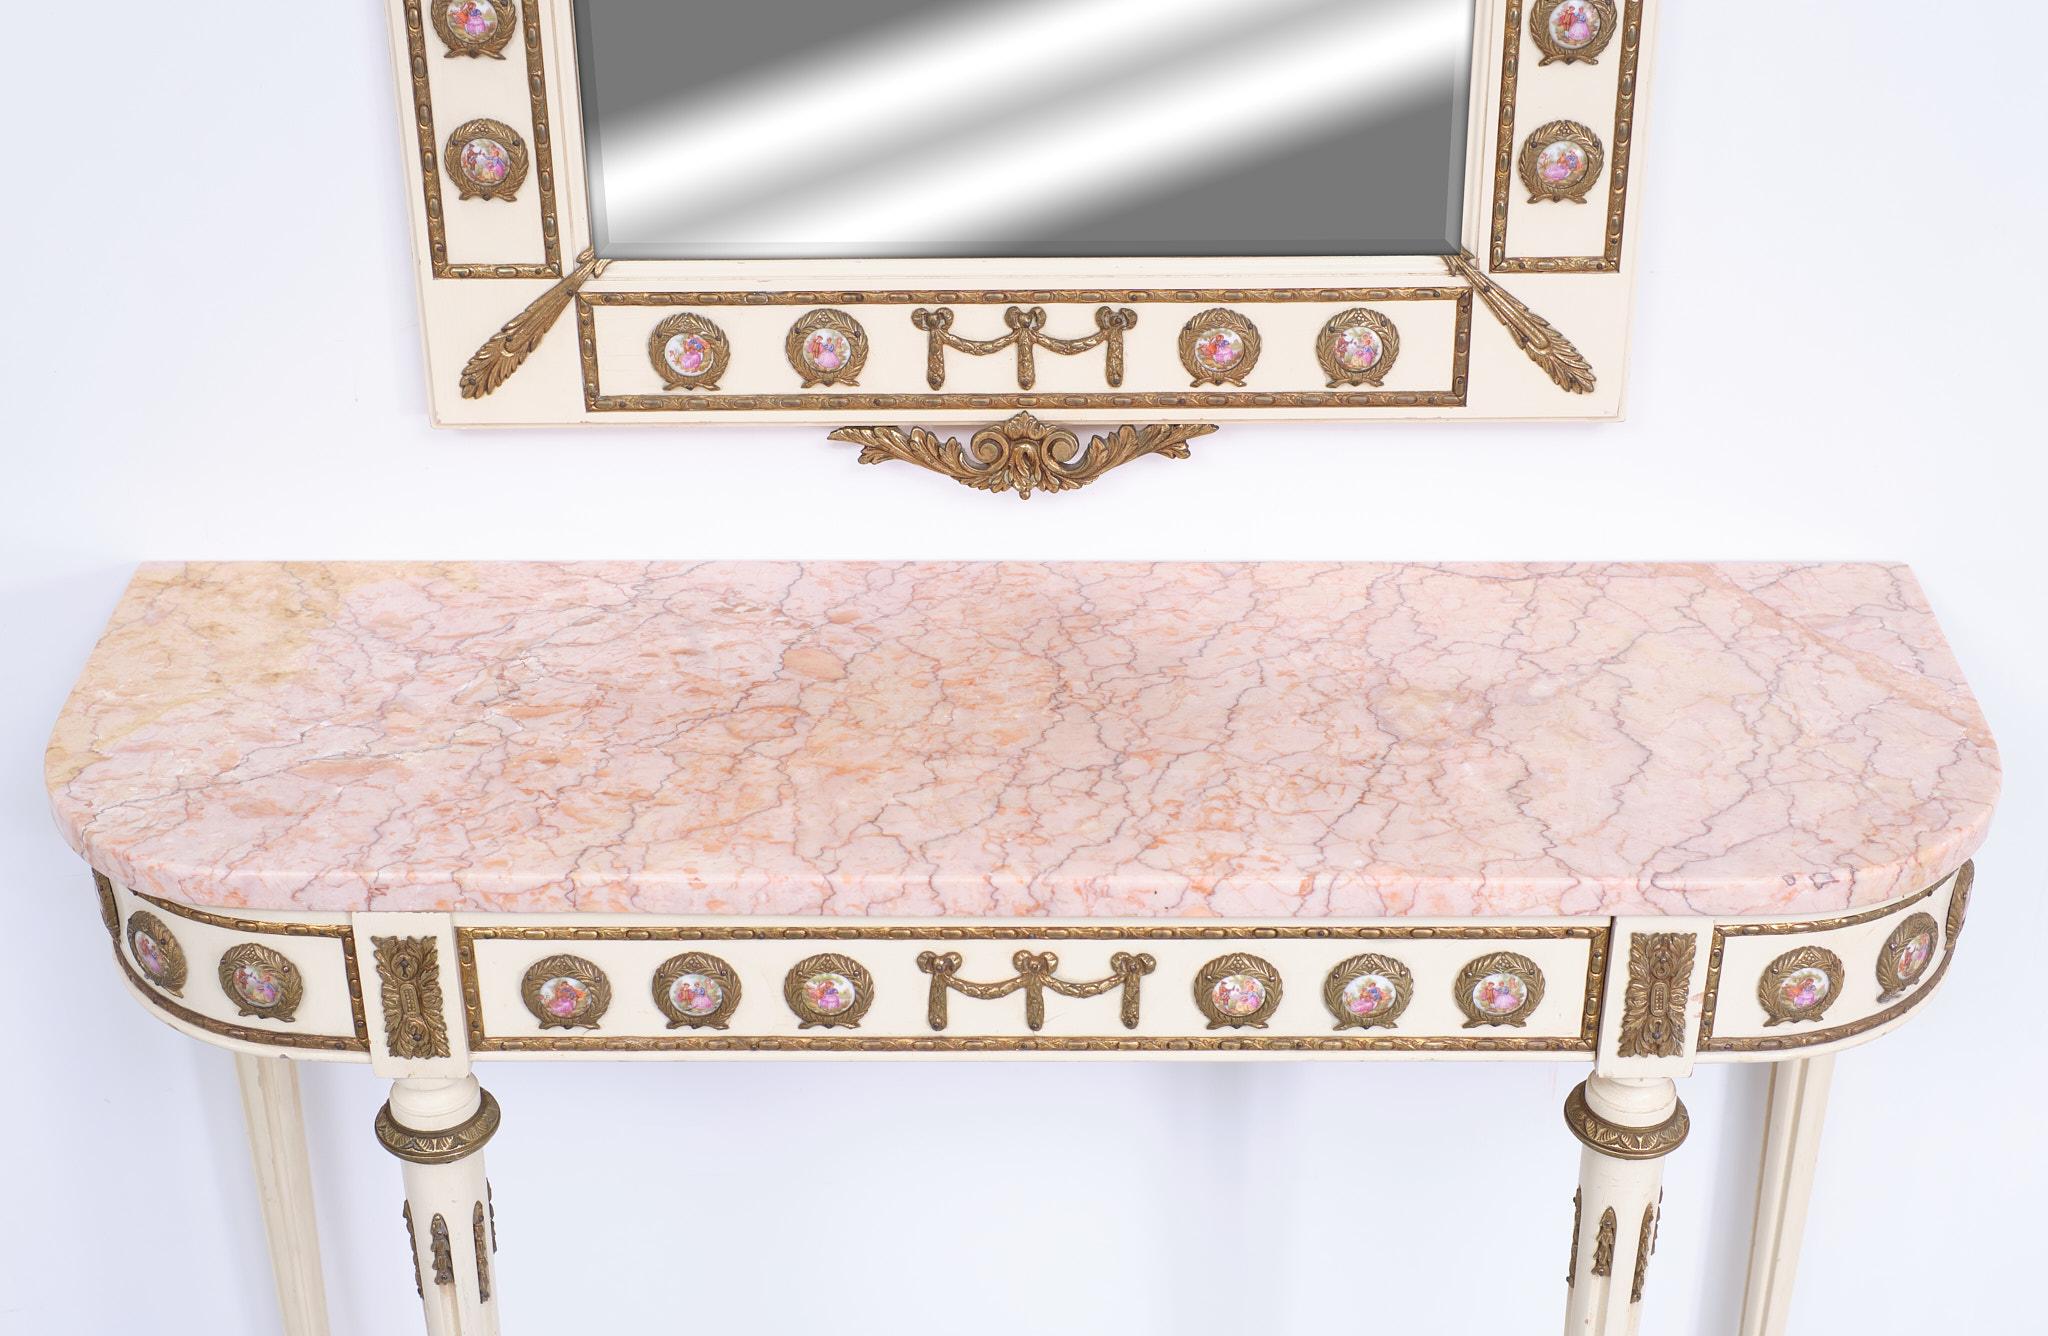 This is an beathiful elegant French Louis XVI Revival console table and matching mirror dating from the Mid-20th Century. Made by Mariner SA Spain top quality. 
This magnificent piece is crafted from wood with stunning ormolu mounts and features